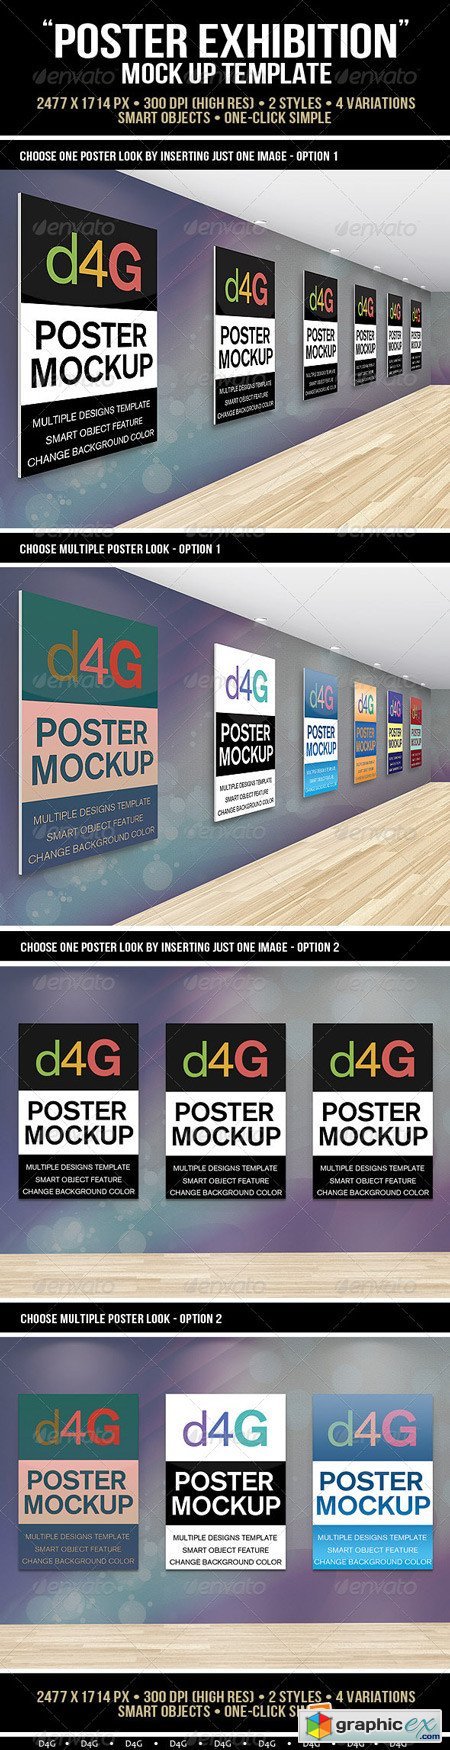 Poster Exhibition Mock Up